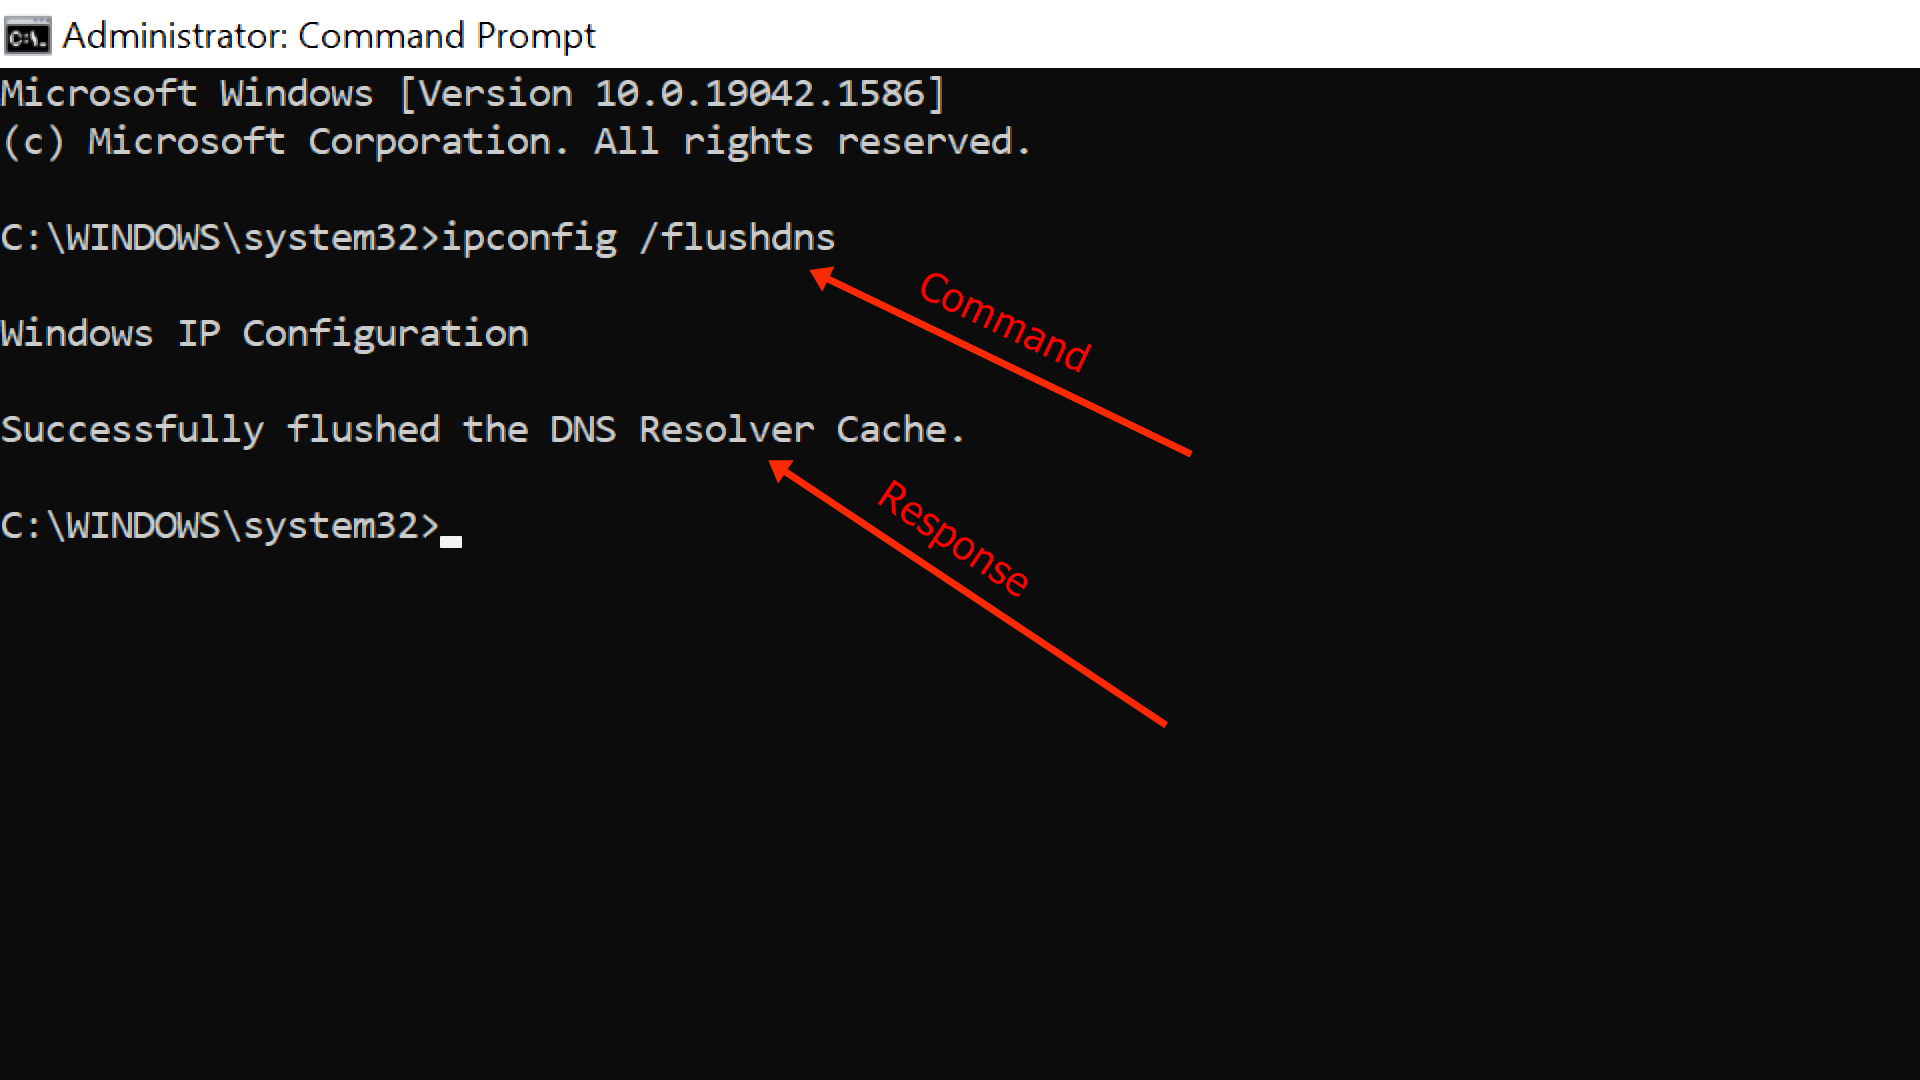 Open Command Prompt as an administrator
Type ipconfig /flushdns and press Enter